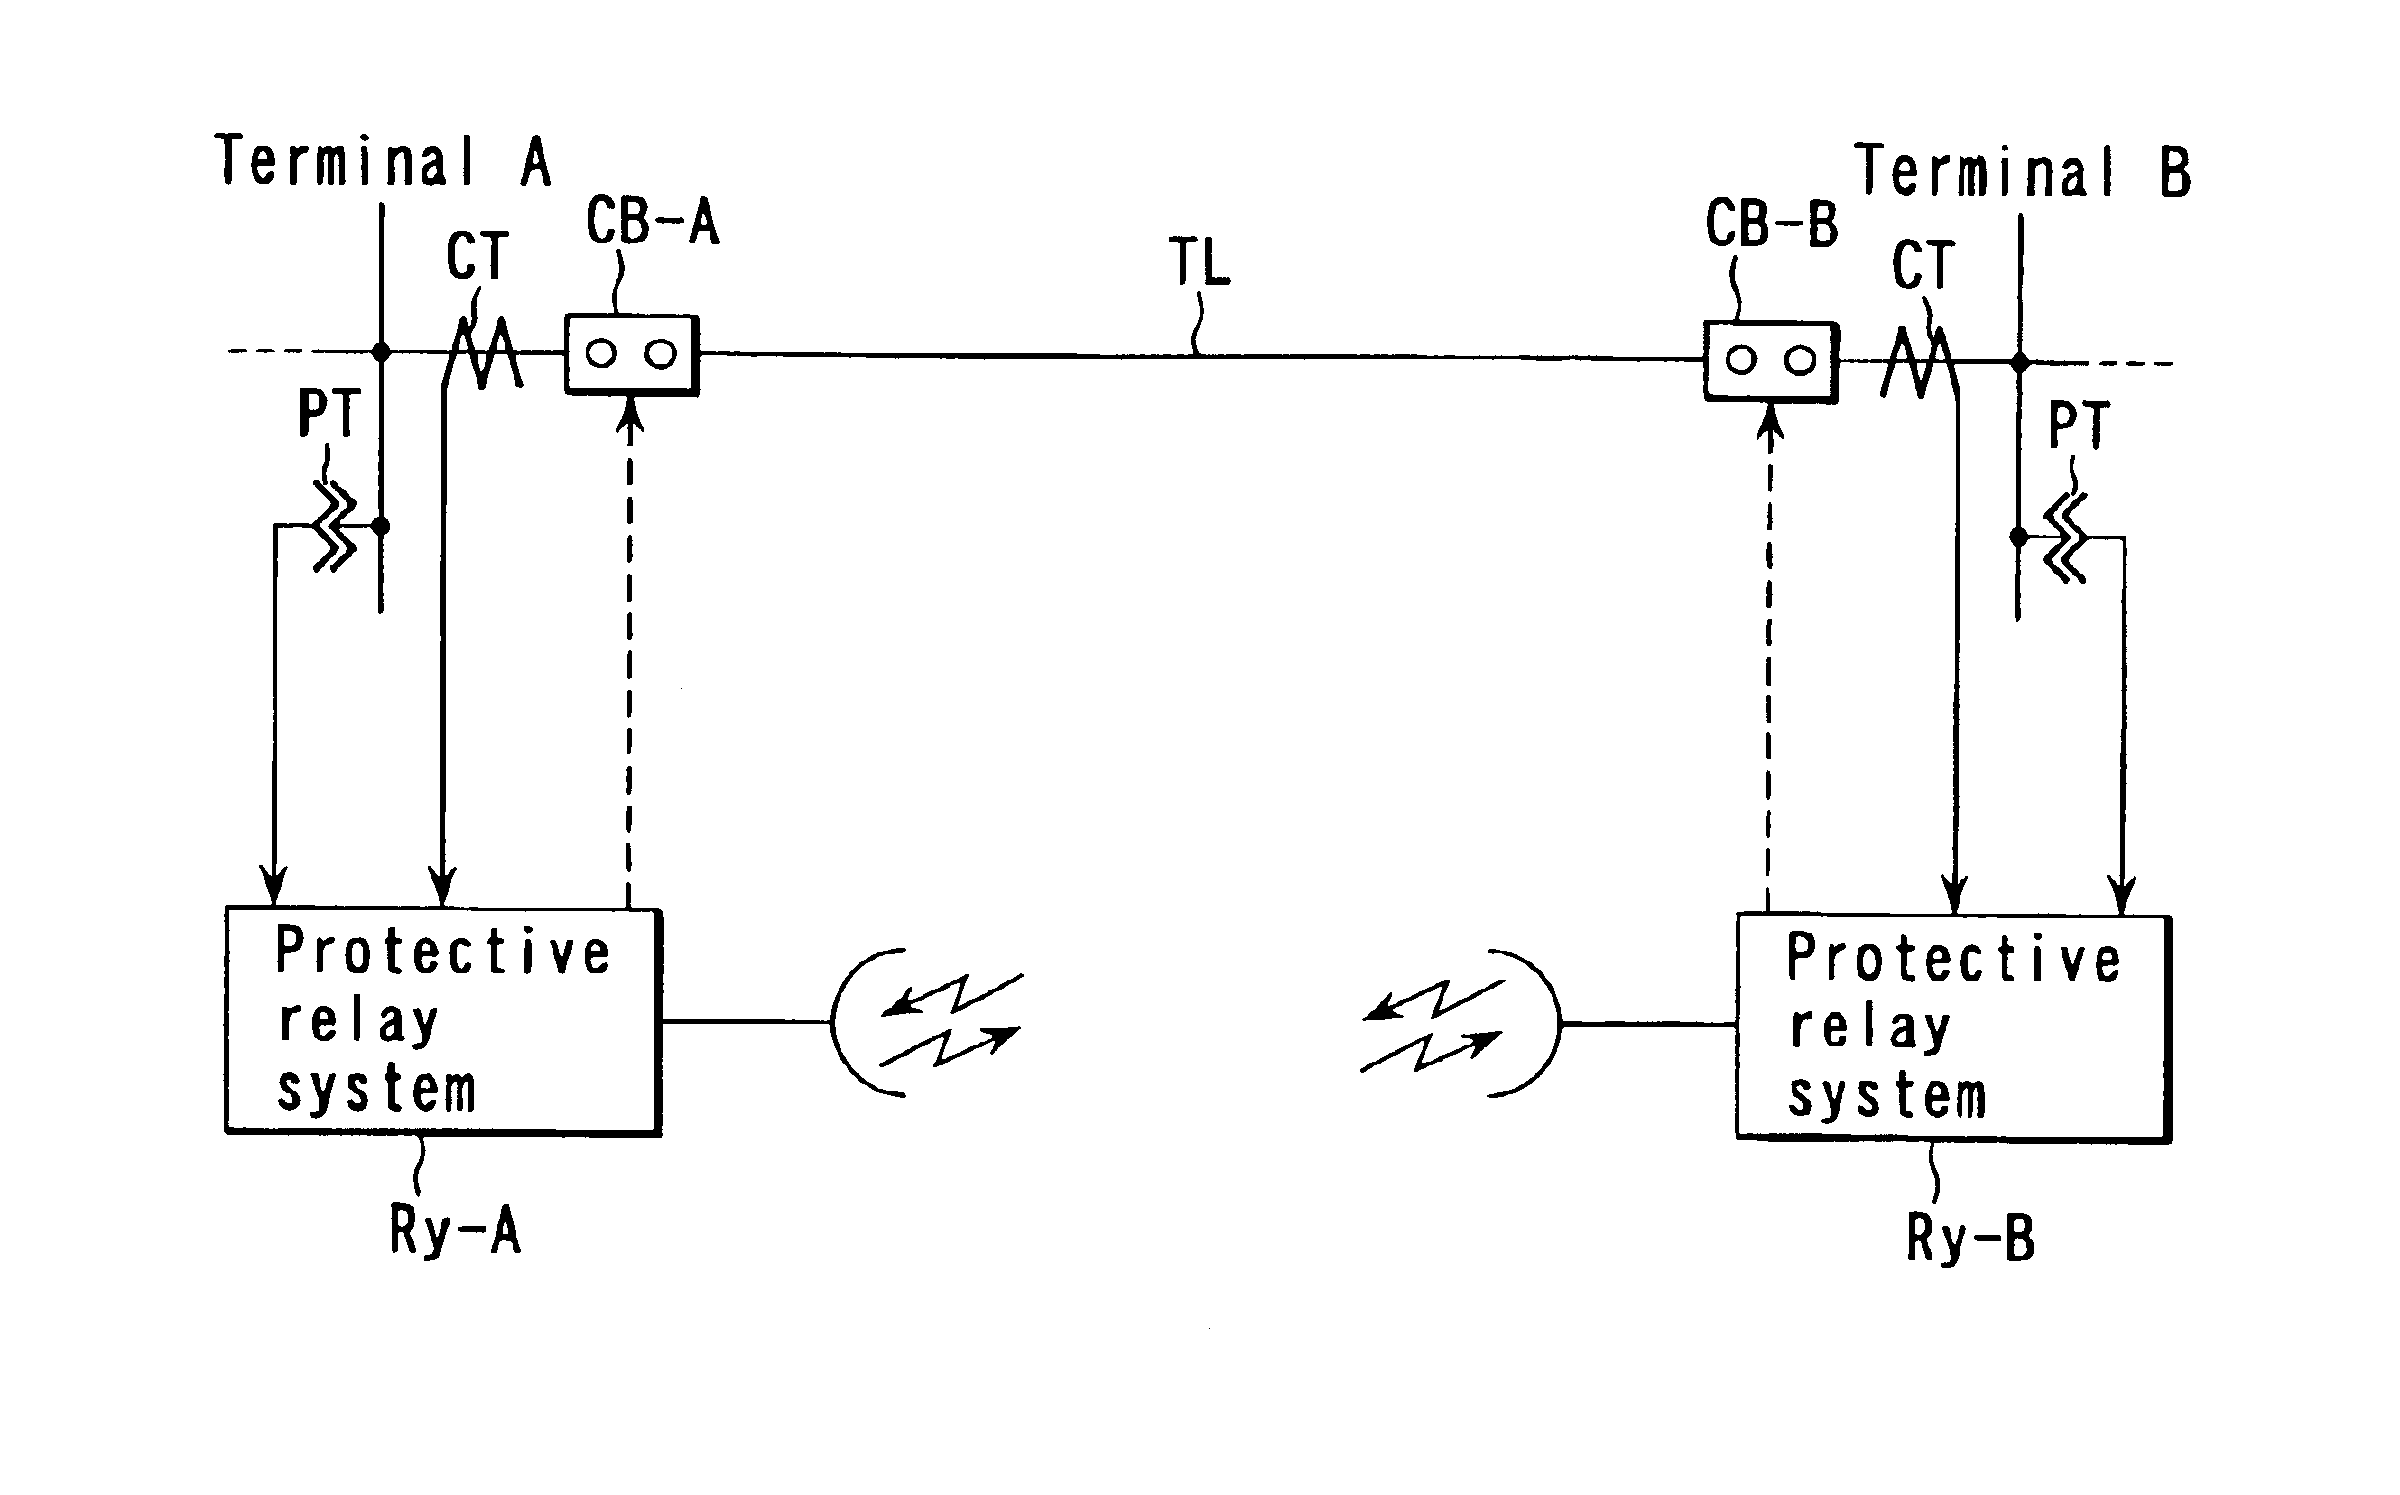 Protective relay system